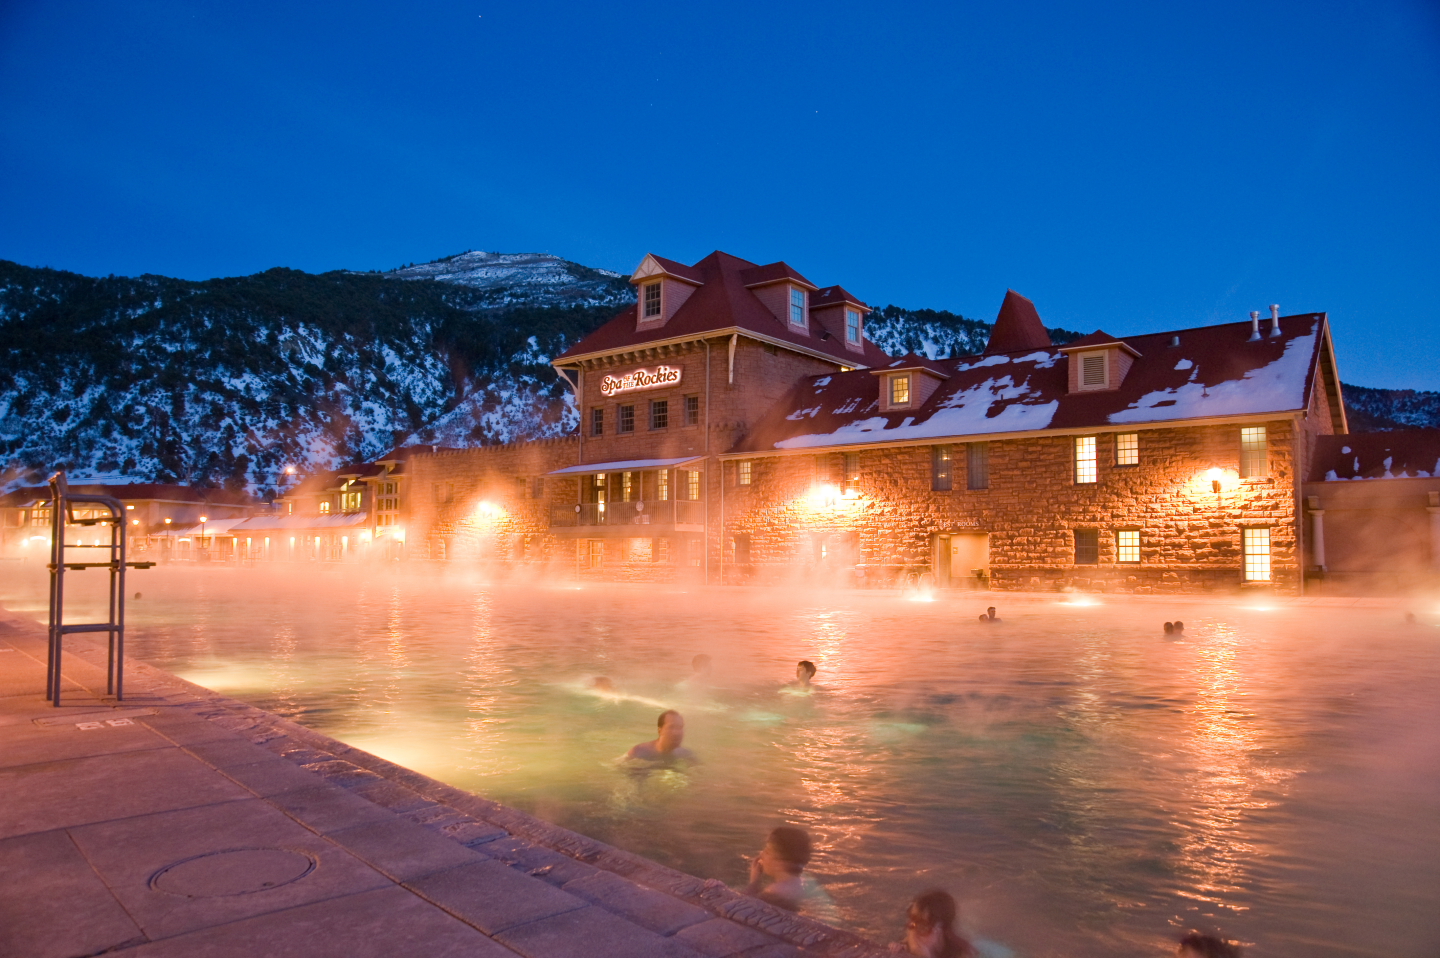 In addition to shopping, many visitors choose to incorporate a soak in the world-famous Glenwood Hot Springs Pool